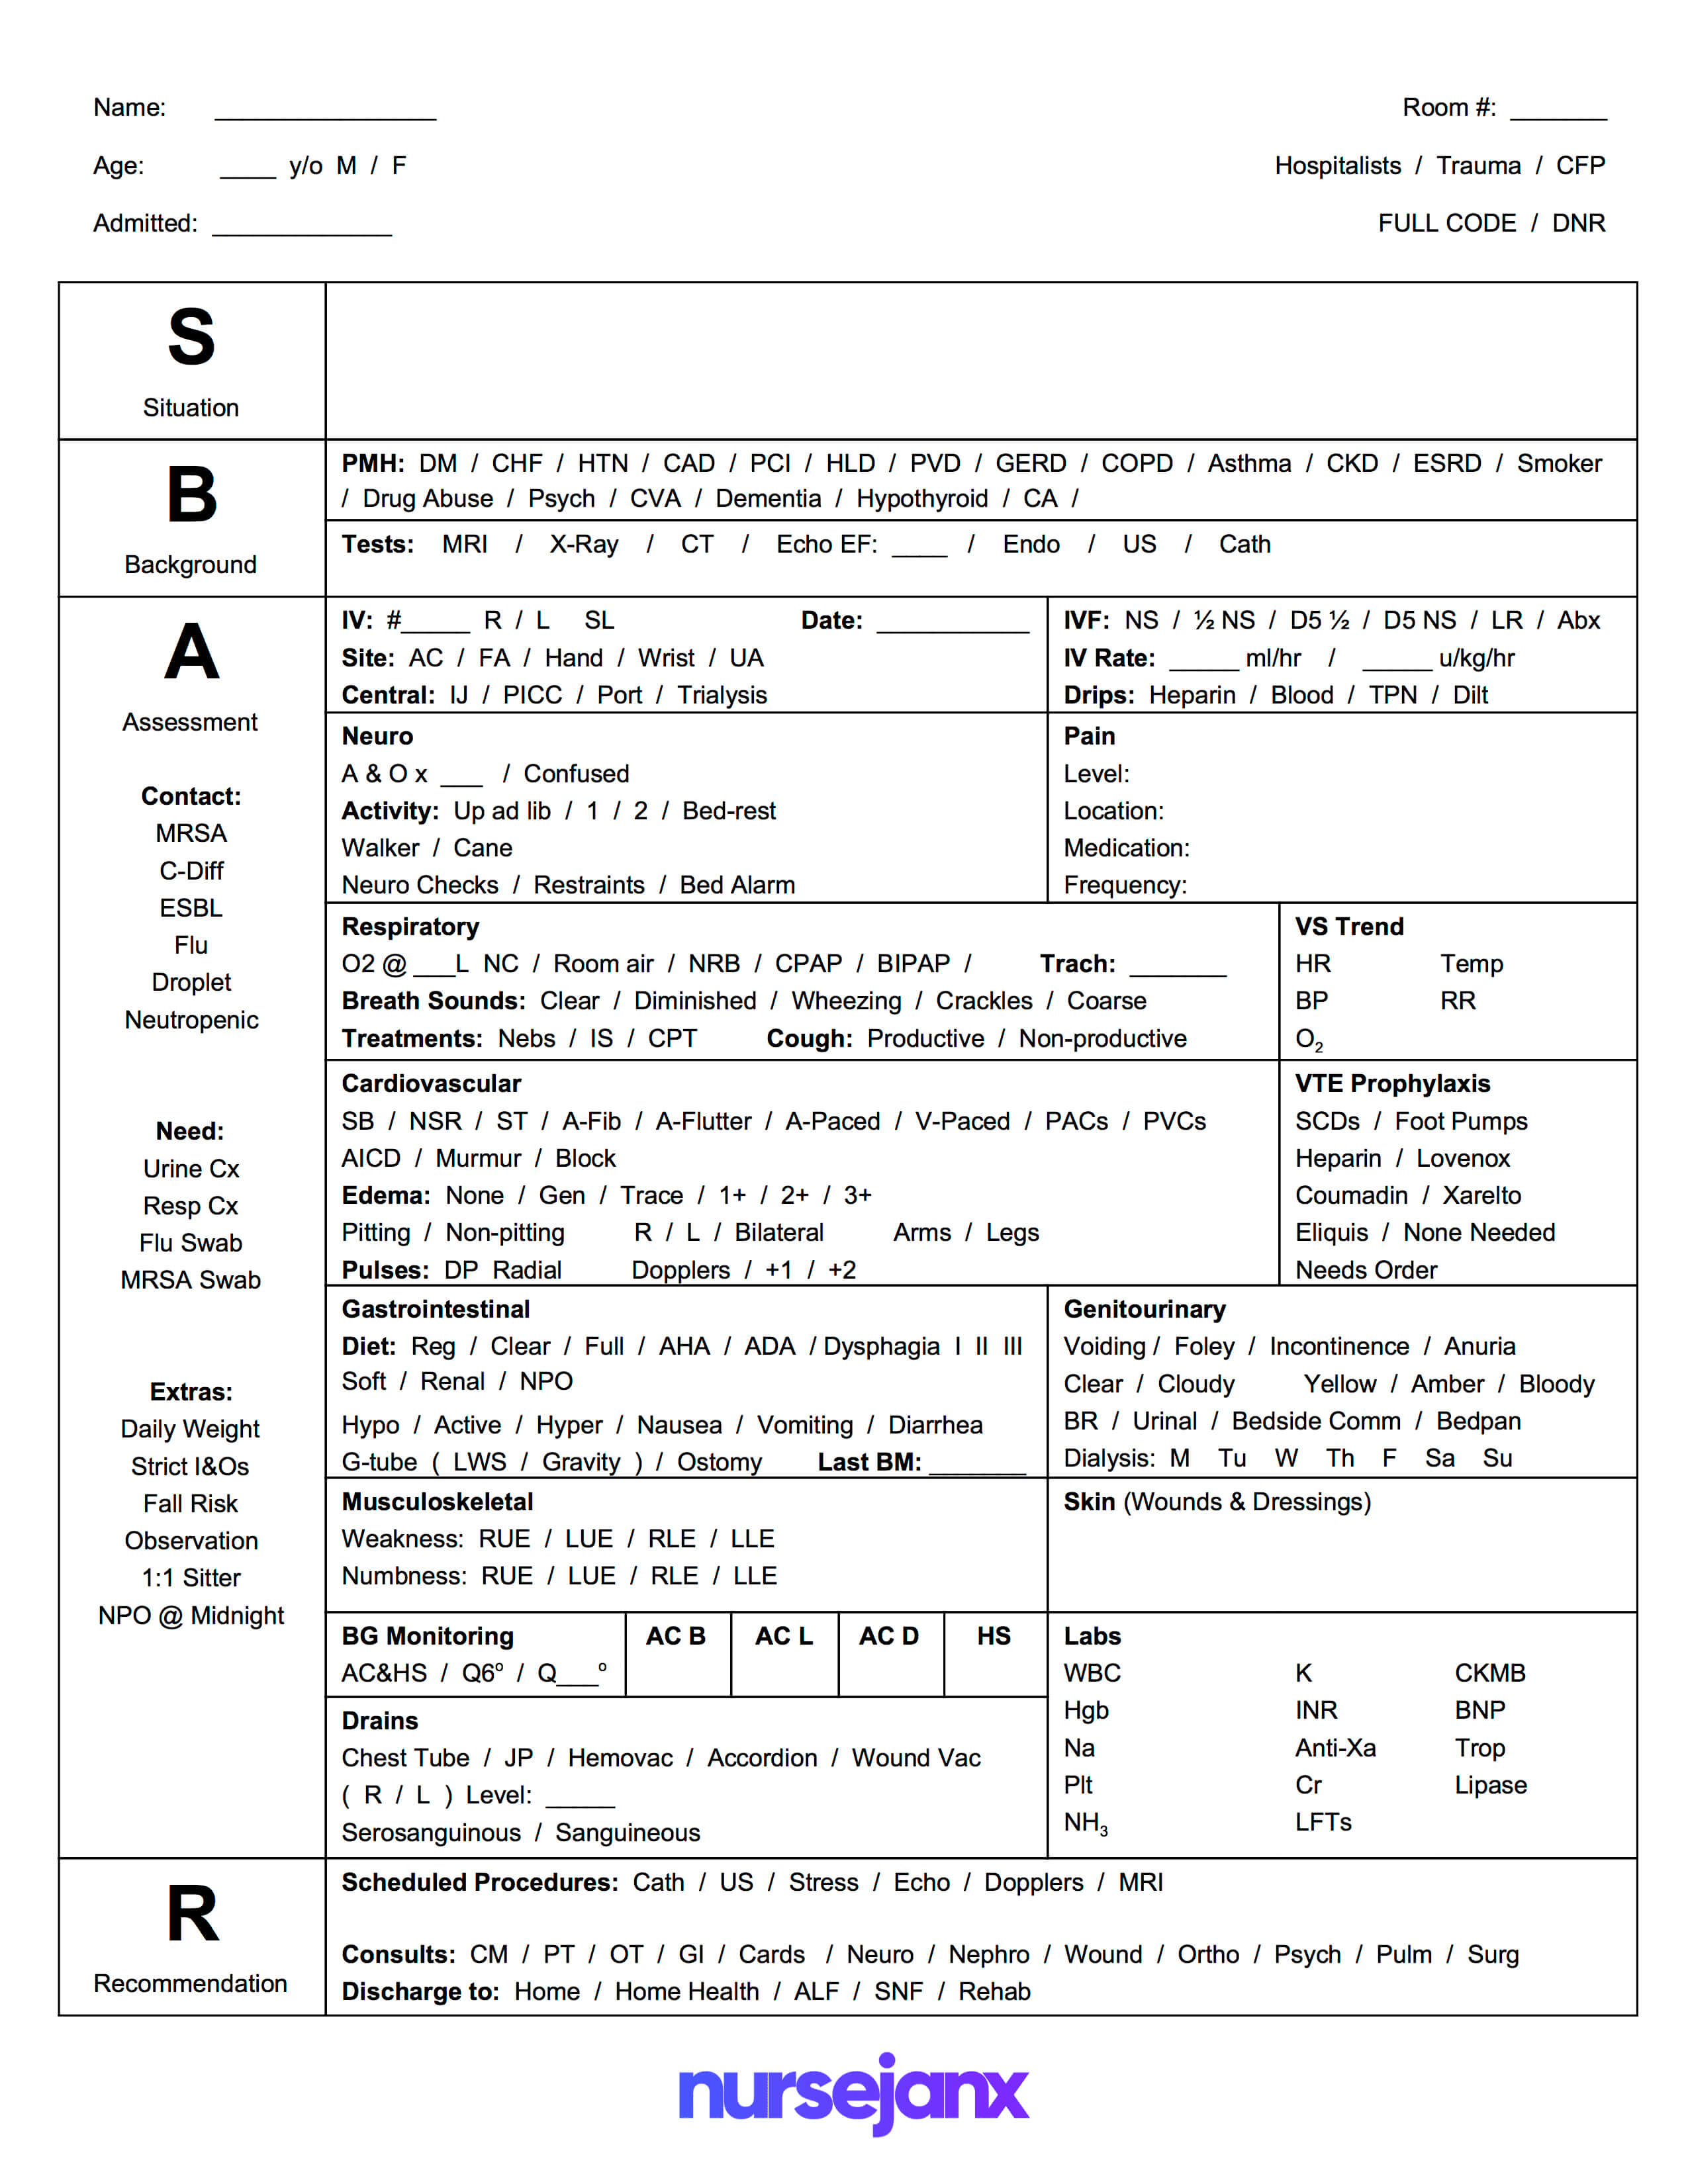 The Best Sbar & Brain Free Nursing Report Sheets & Templates With Med Surg Report Sheet Templates